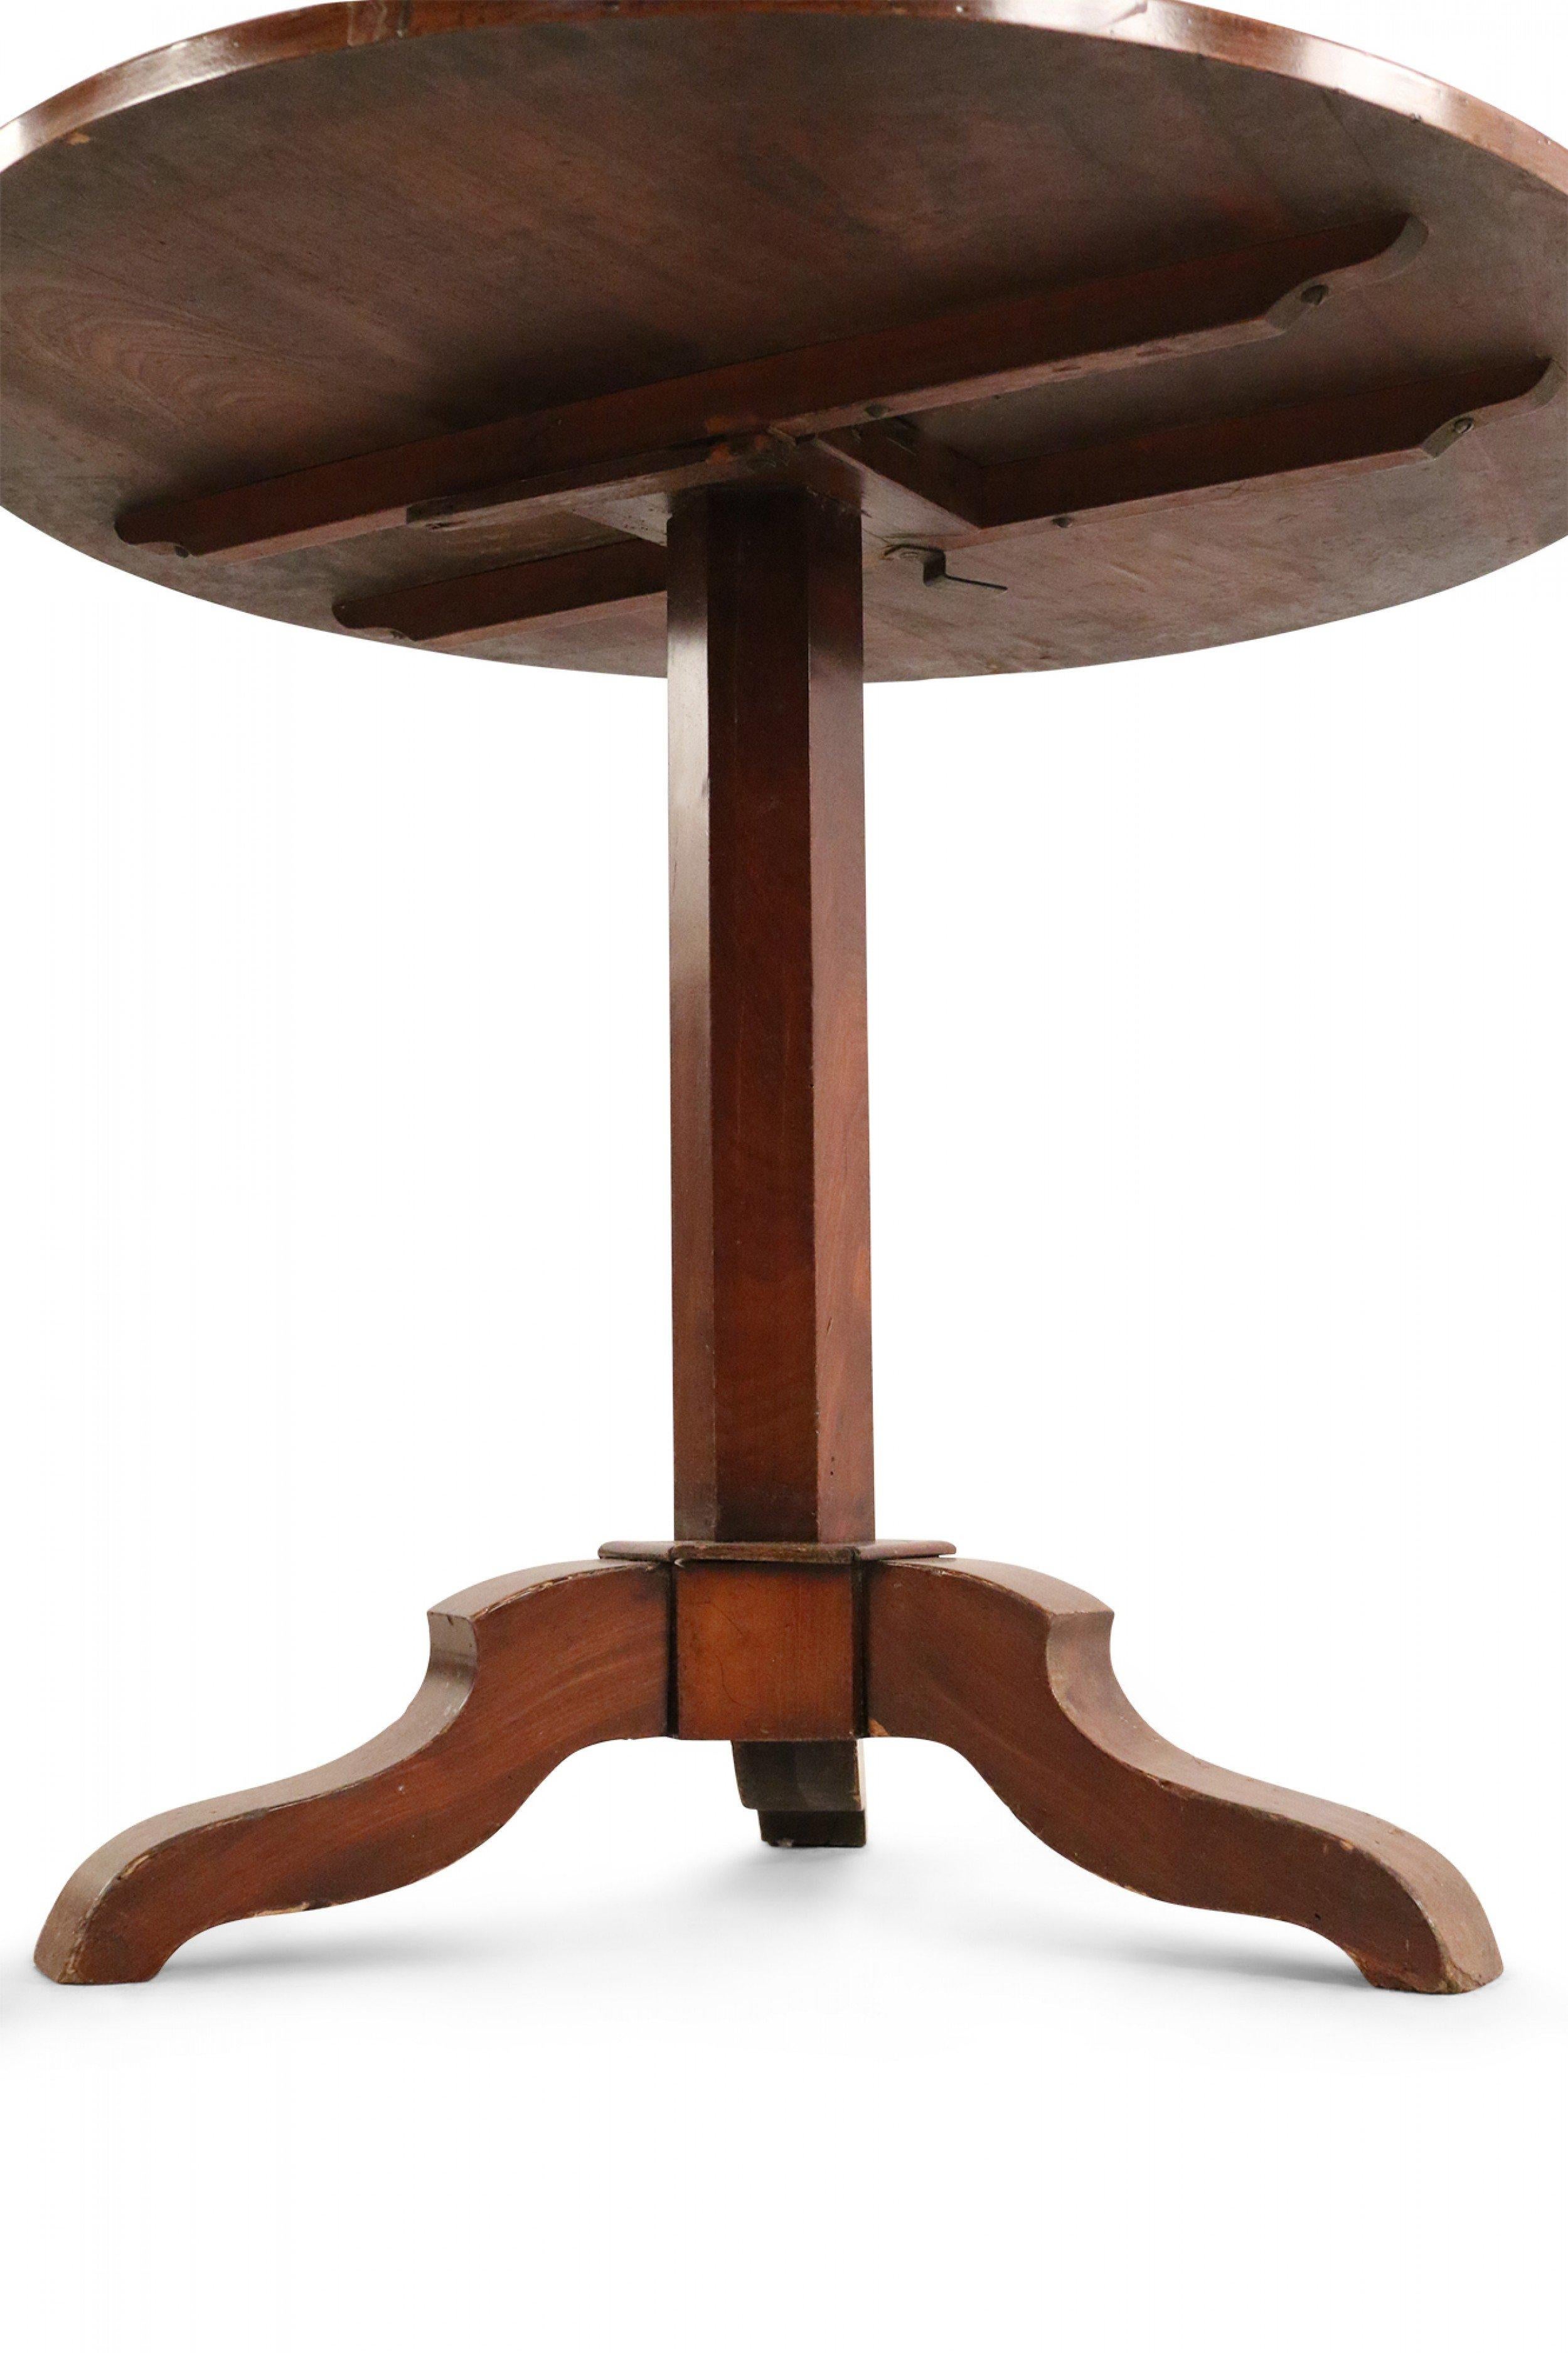 Dutch (19th century) mahogany flame veneer round tilt-top table with a center floral marquetry inlaid medallion supported on a tripartite base with scalloped legs.
       